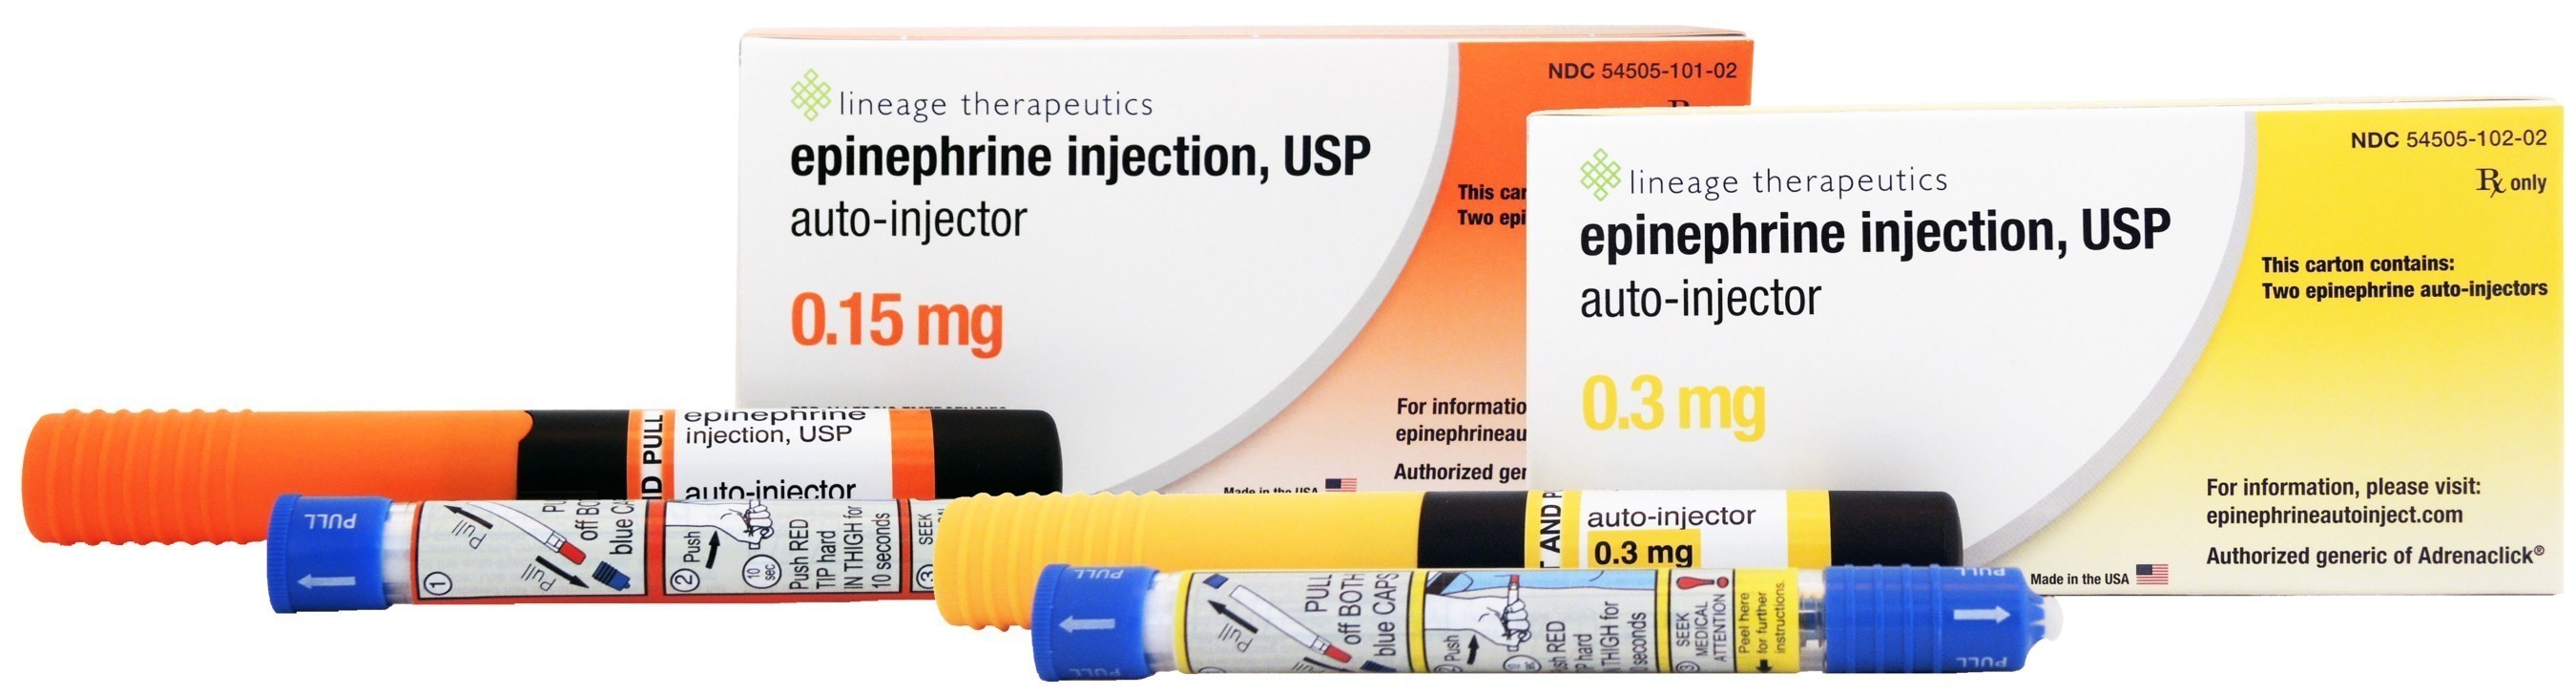 Epinephrine Injection, USP Auto-Injector, 0.15 mg and 0.3 mg, the authorized generic to Adrenaclick(R), is currently available in pharmacies across the United States